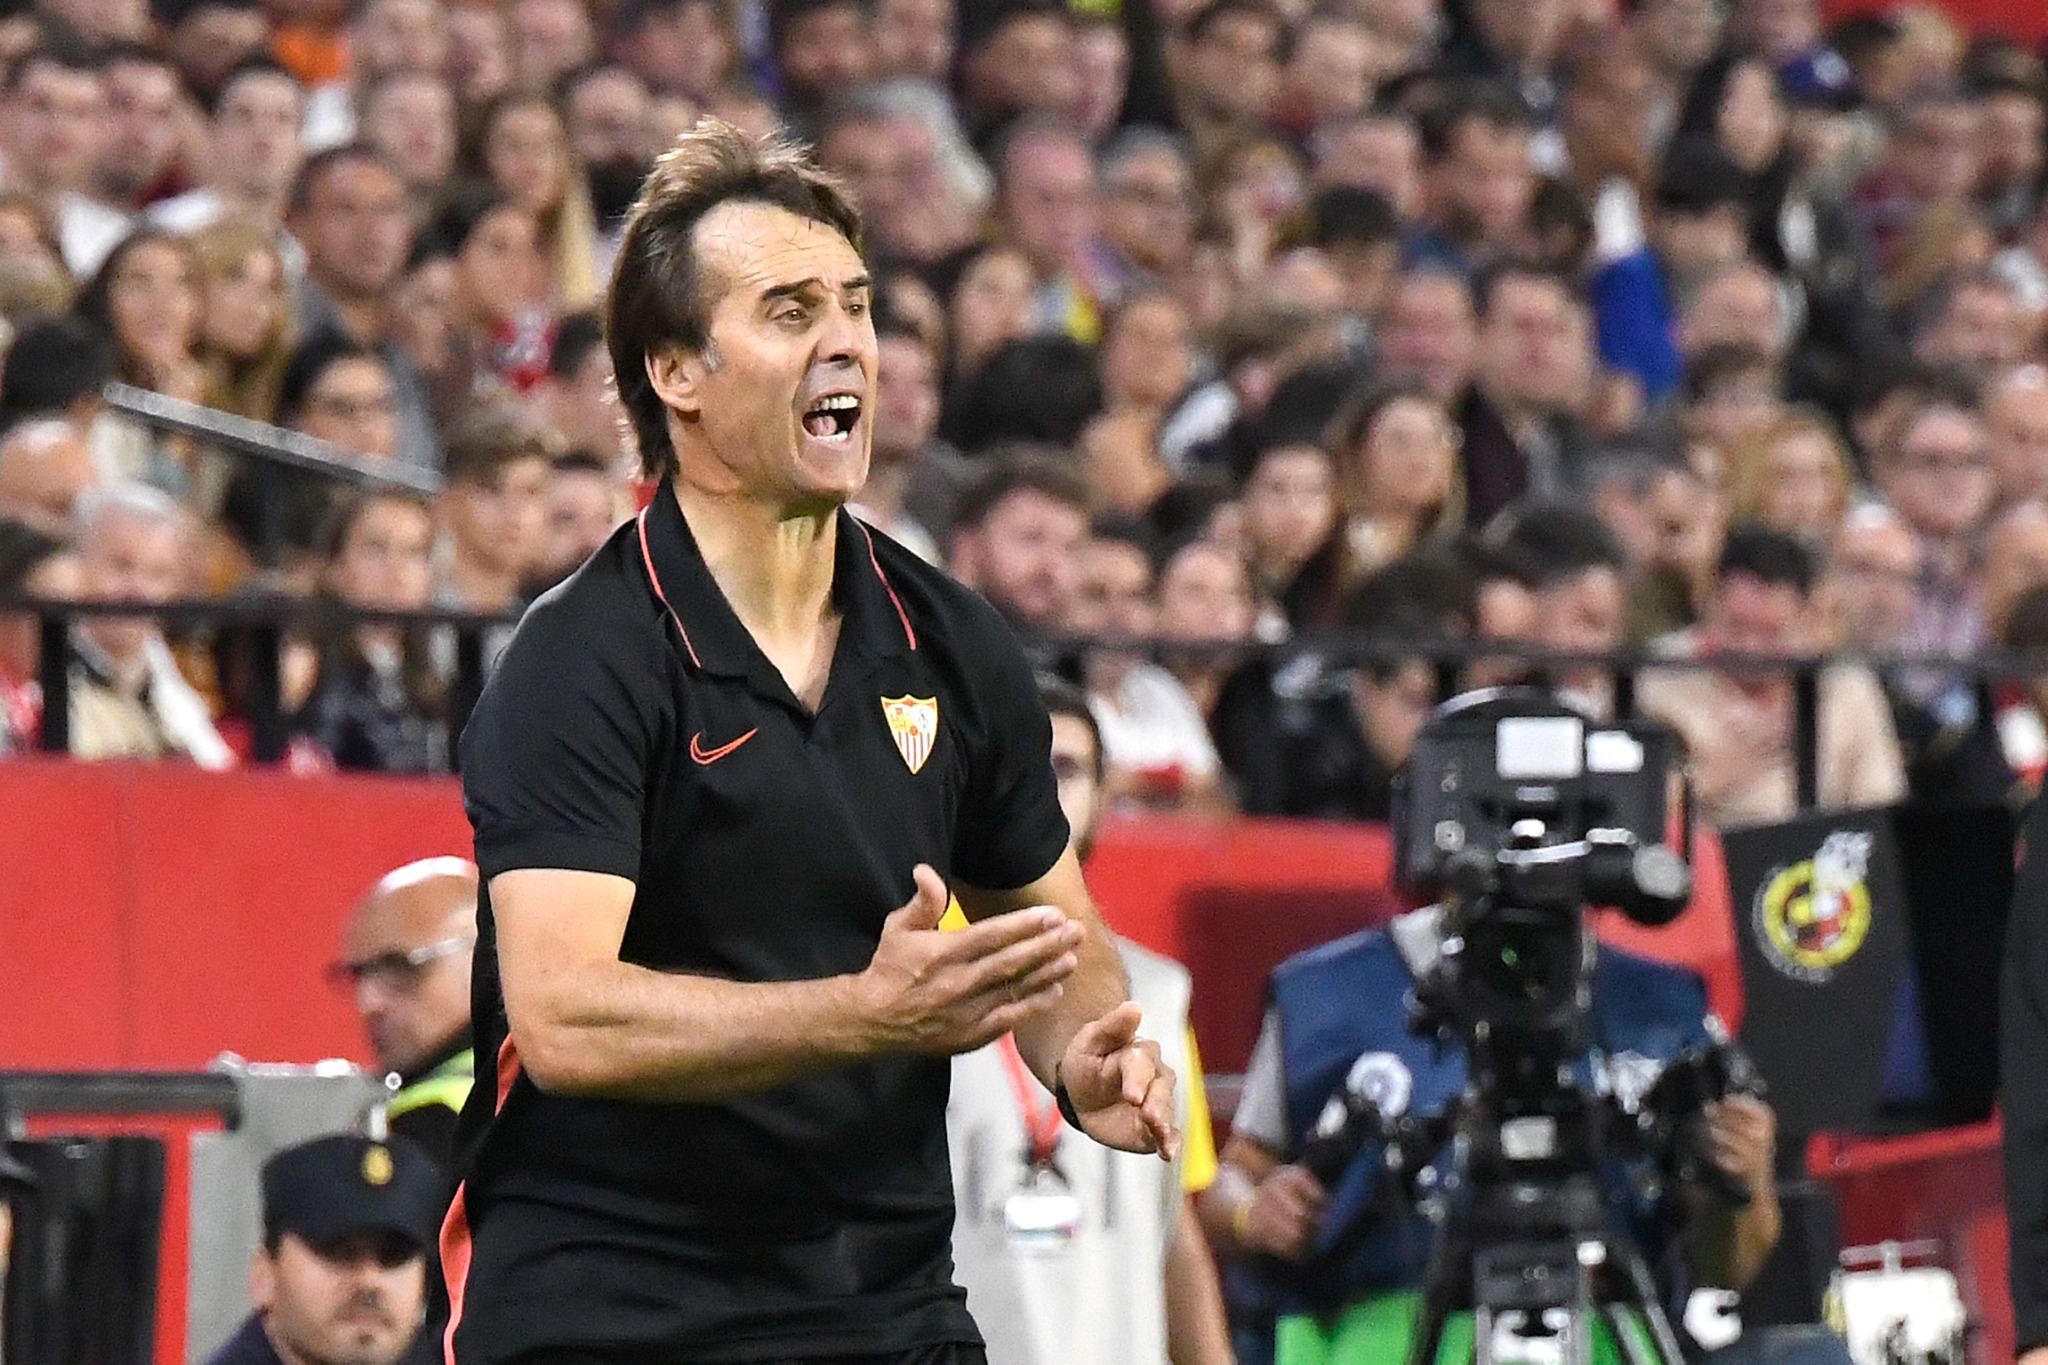 Julen Lopetegui giving instructions to his team during the draw against Atlético